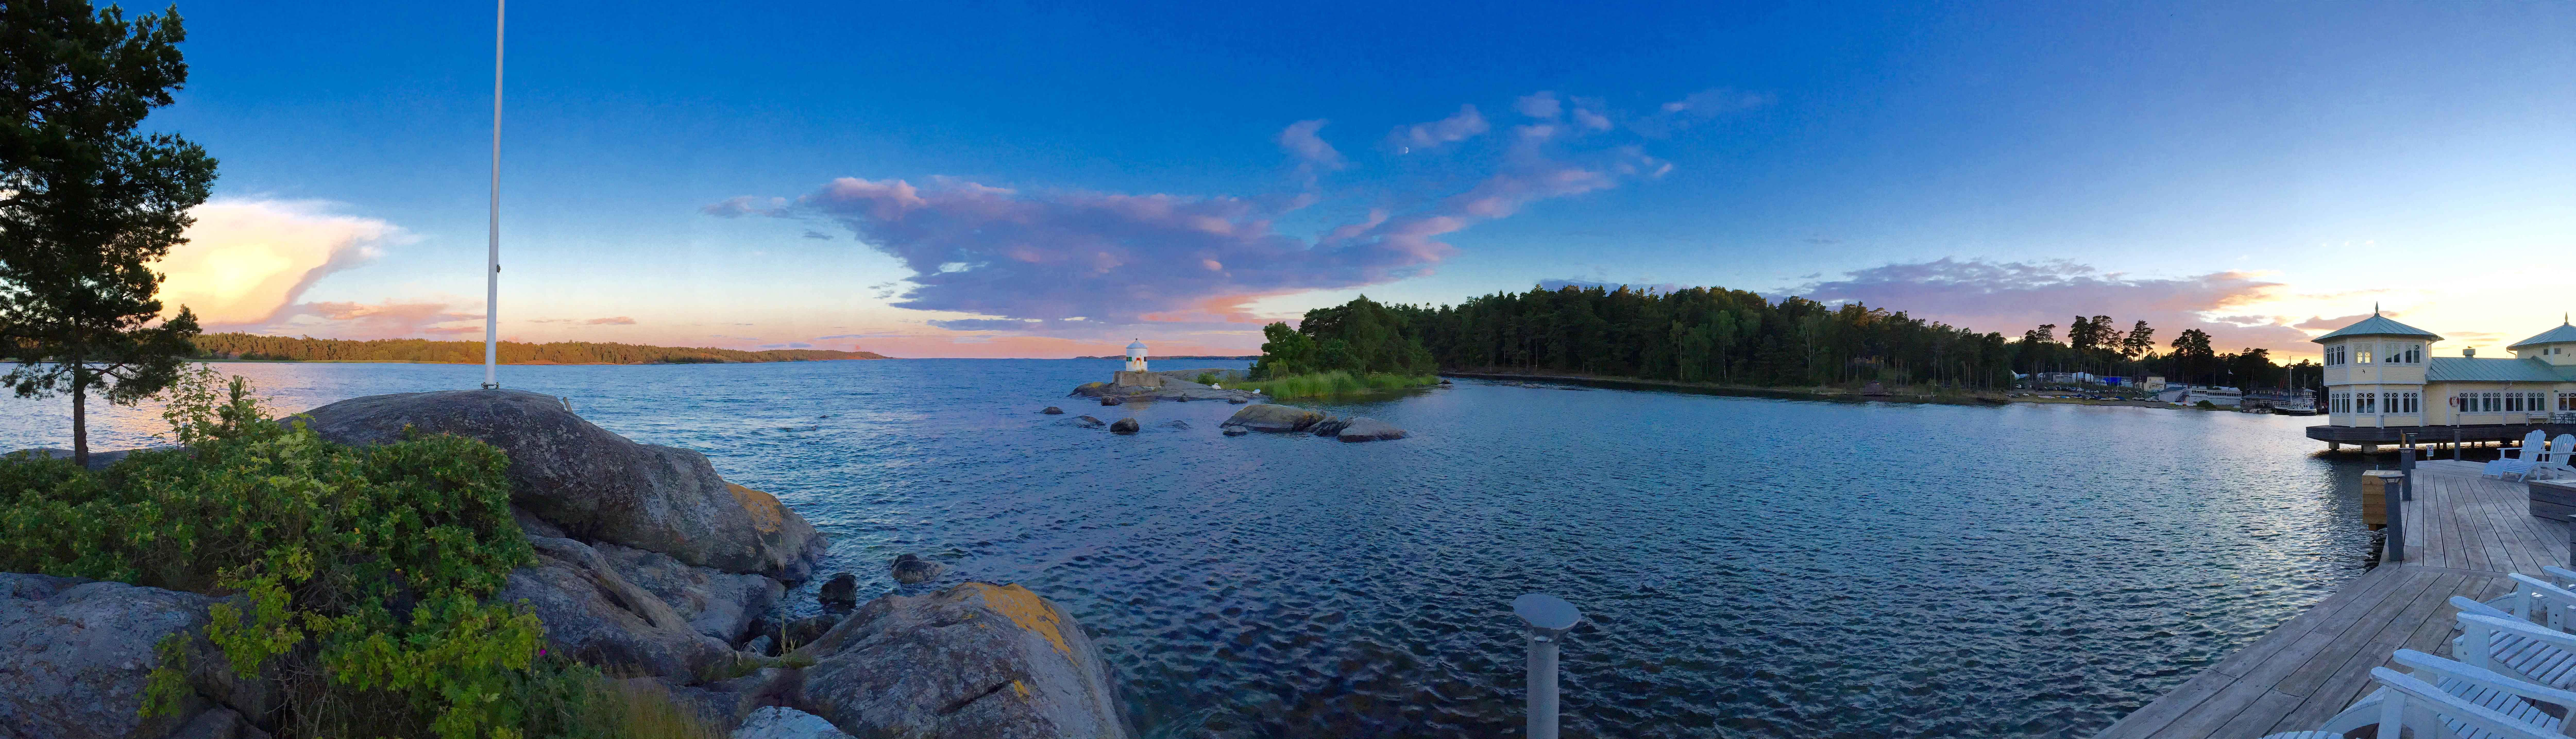 Savor Summer Like A Swede in Stockholm's Nynäshamn Archipelago - Mags on the Move